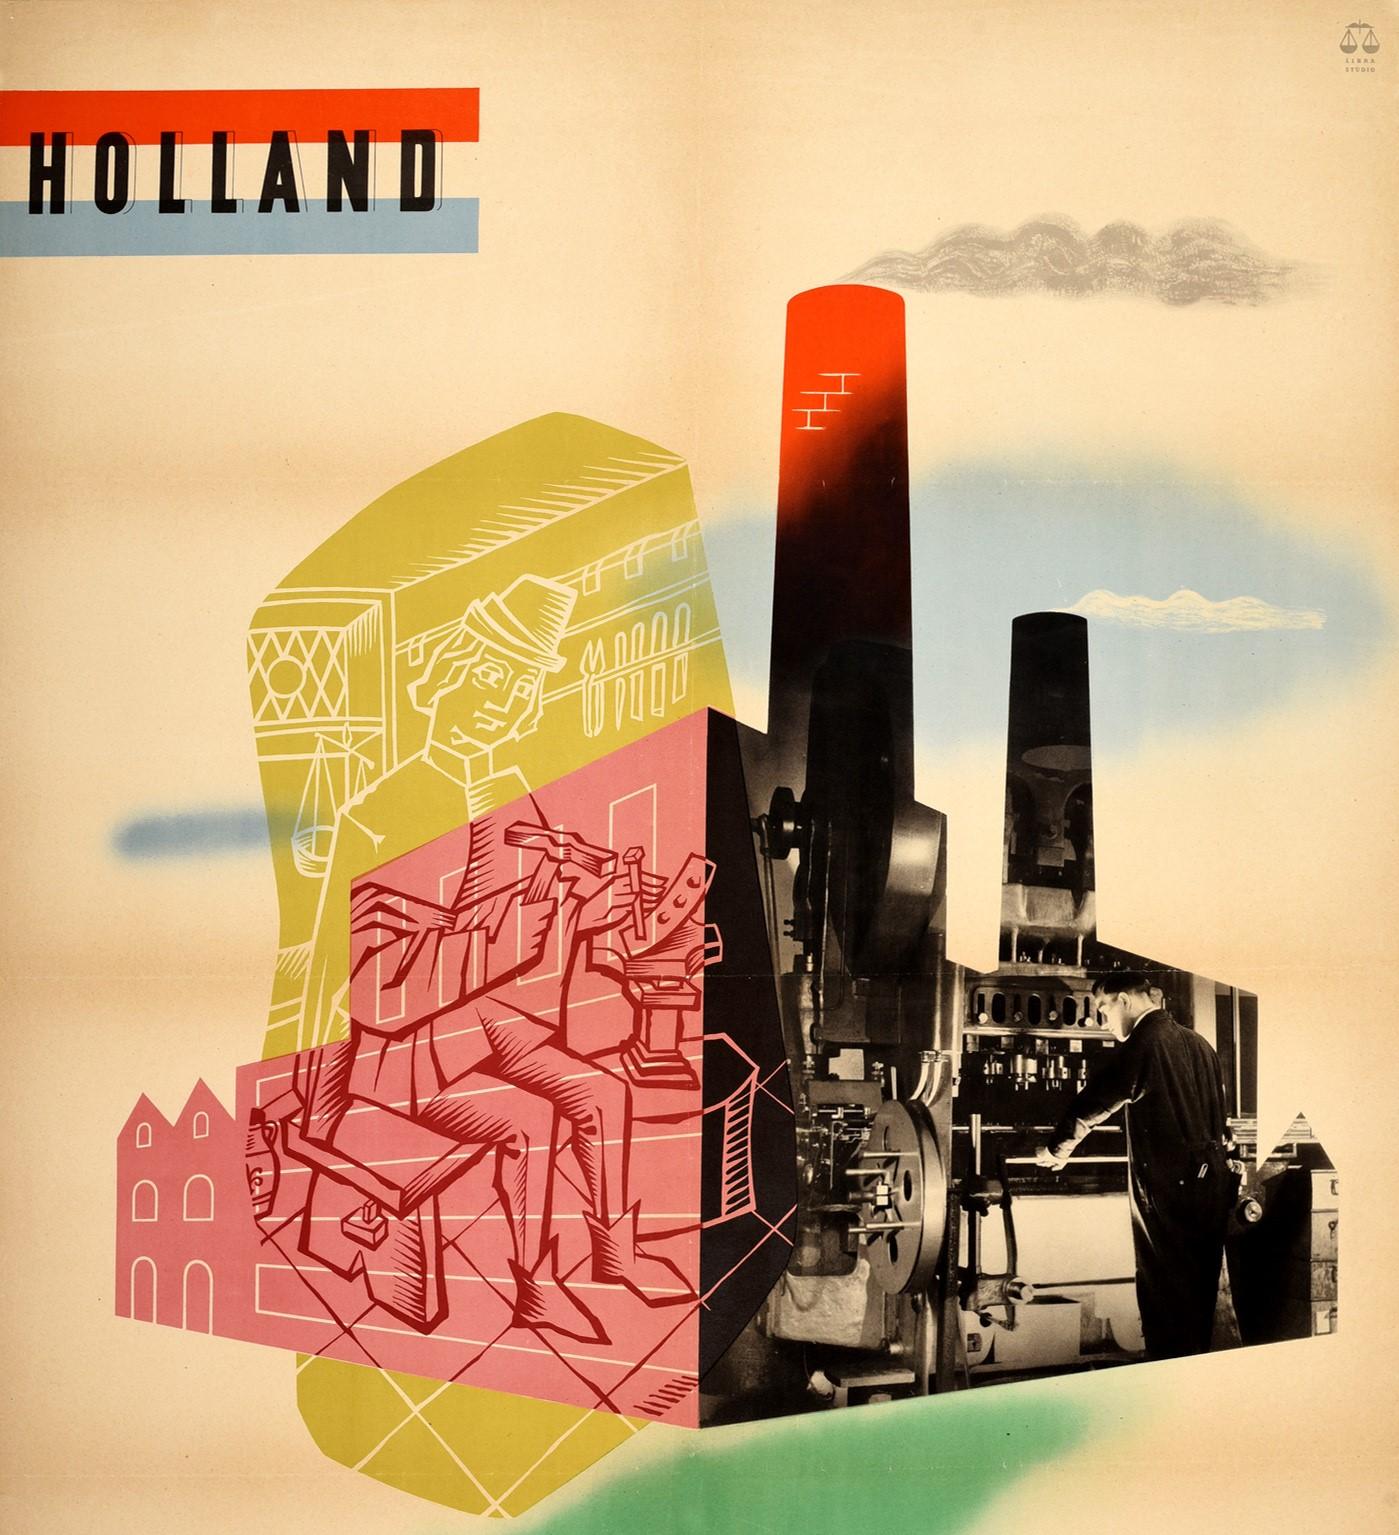 Original vintage poster - Holland Tradition Tools changed, skill maintained in the Netherlands industry - featuring a mid-century modern design depicting a factory with two smoking chimneys with one side showing a colourful illustration of a man